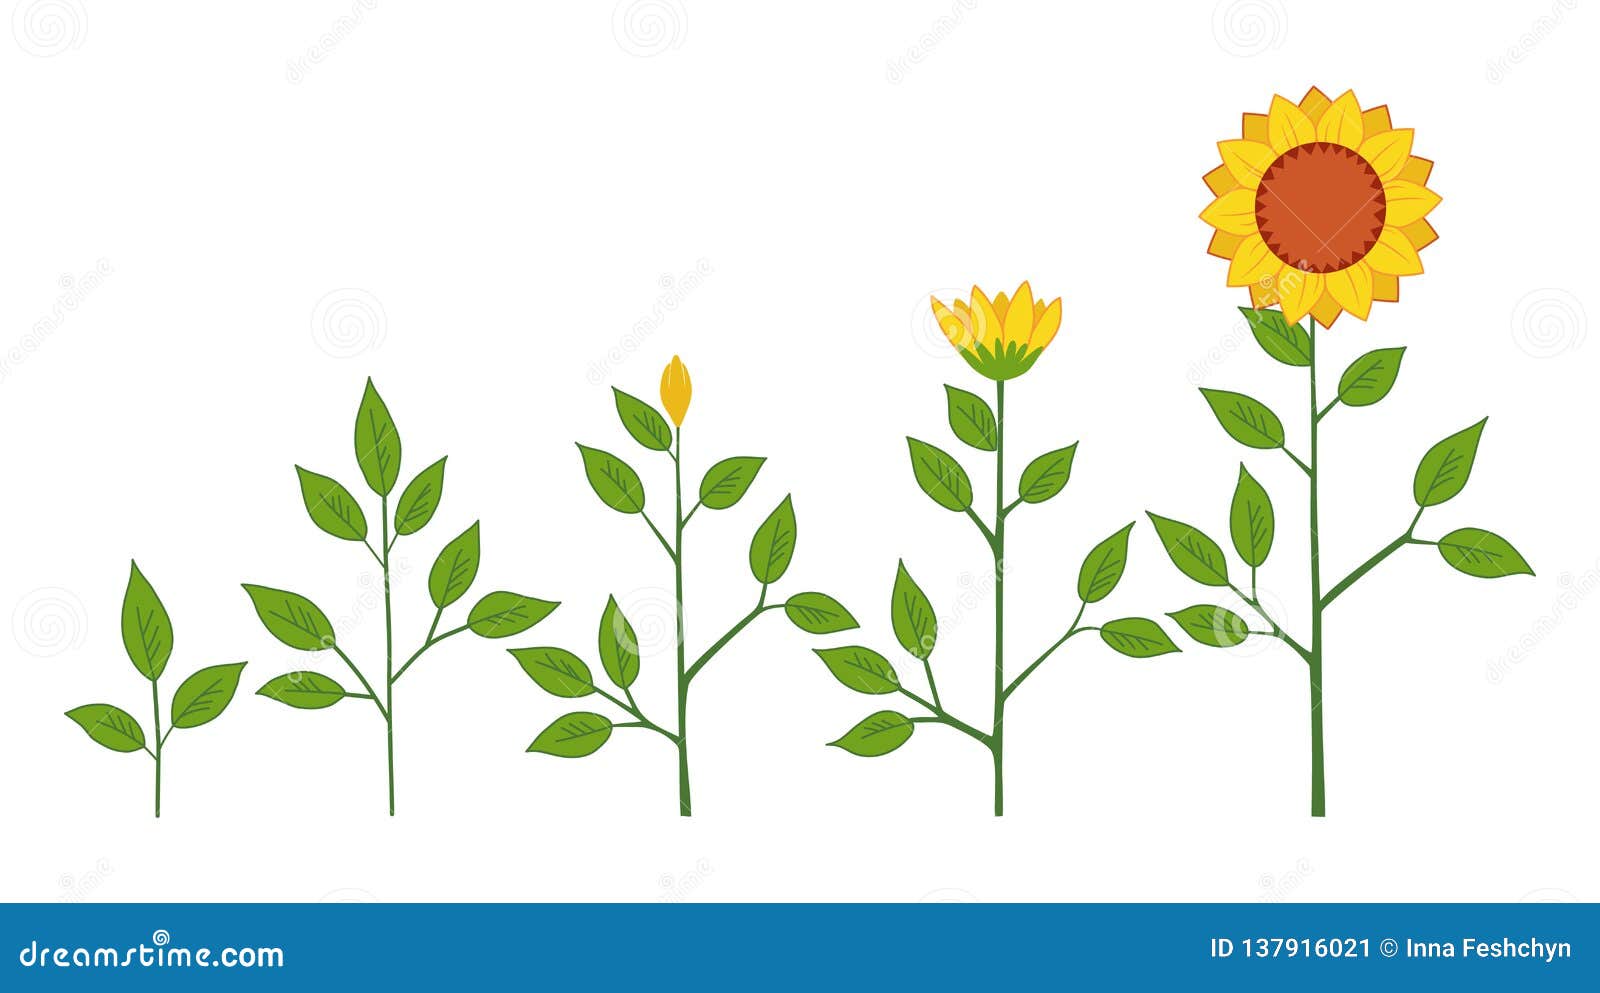  sunflower plant growth stages concept, abstract flower s  on white background. sunflower life cycle